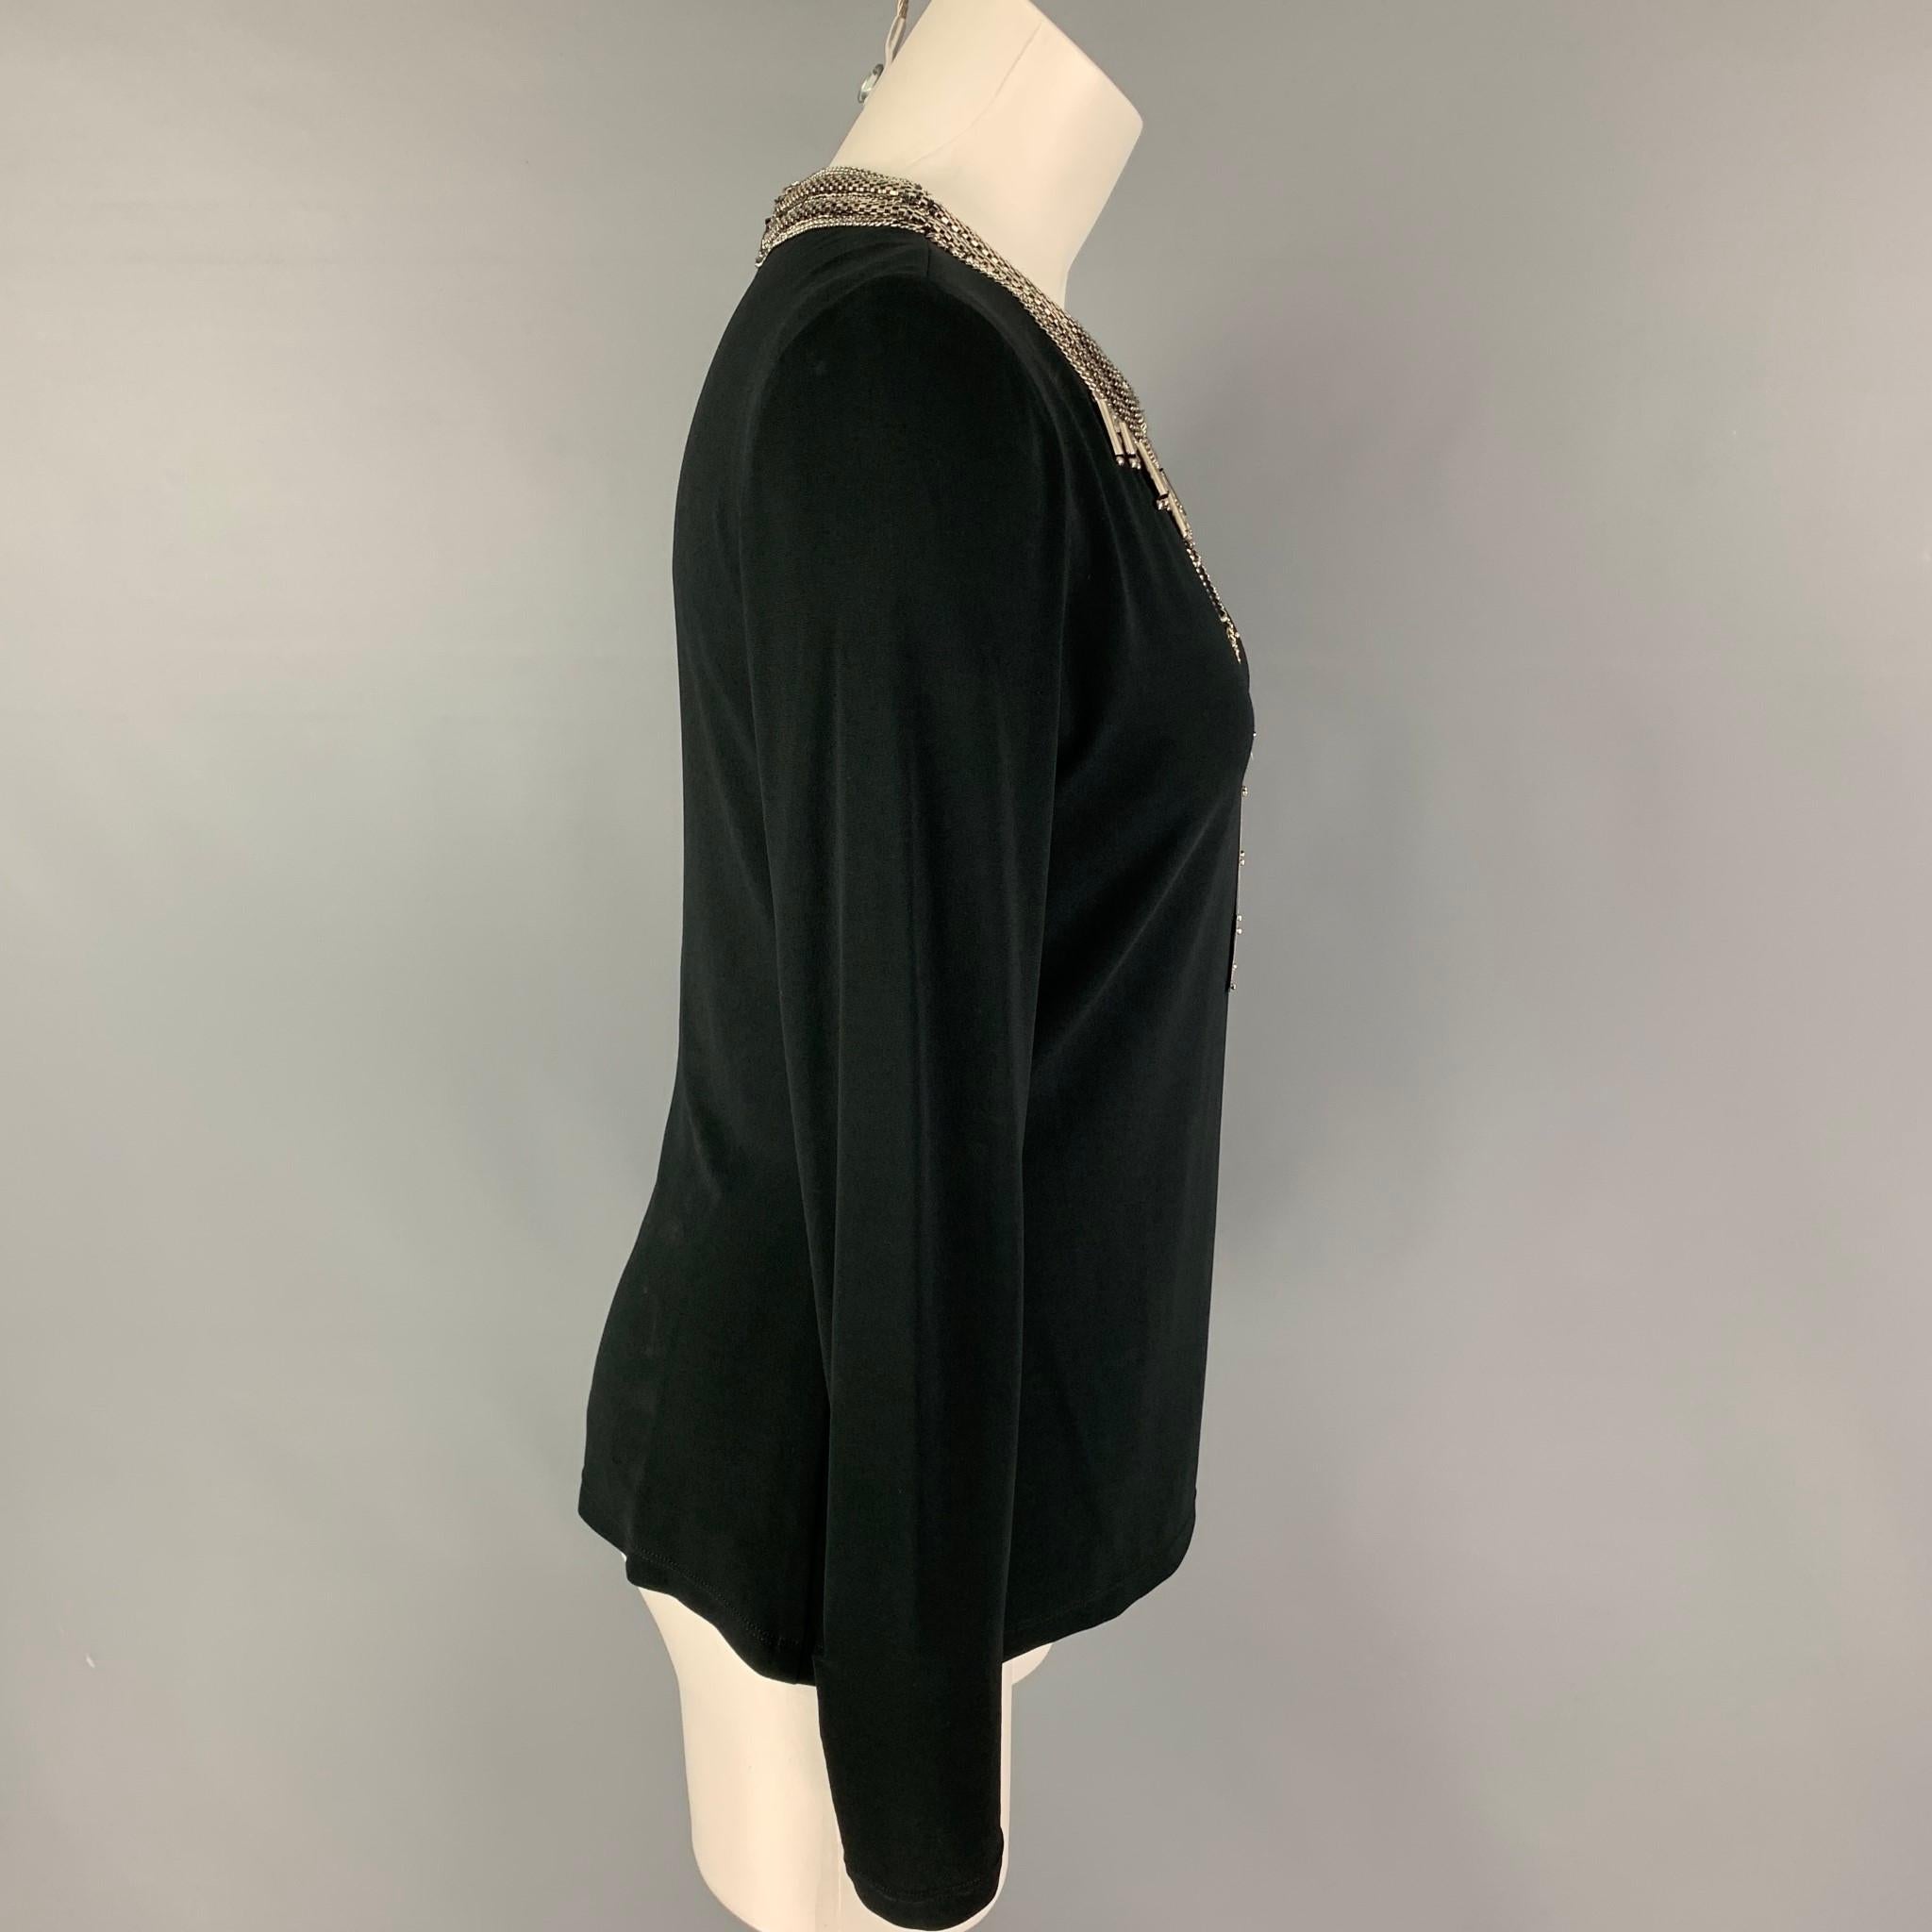 RALPH LAUREN Collection dress top comes in a black viscose featuring a front silver tone metal embellished design and a back zip up closure. 

Very Good  Pre-Owned Condition.
Marked: 6

Measurements:

Shoulder: 15 in.
Bust: 34 in.
Sleeve: 27